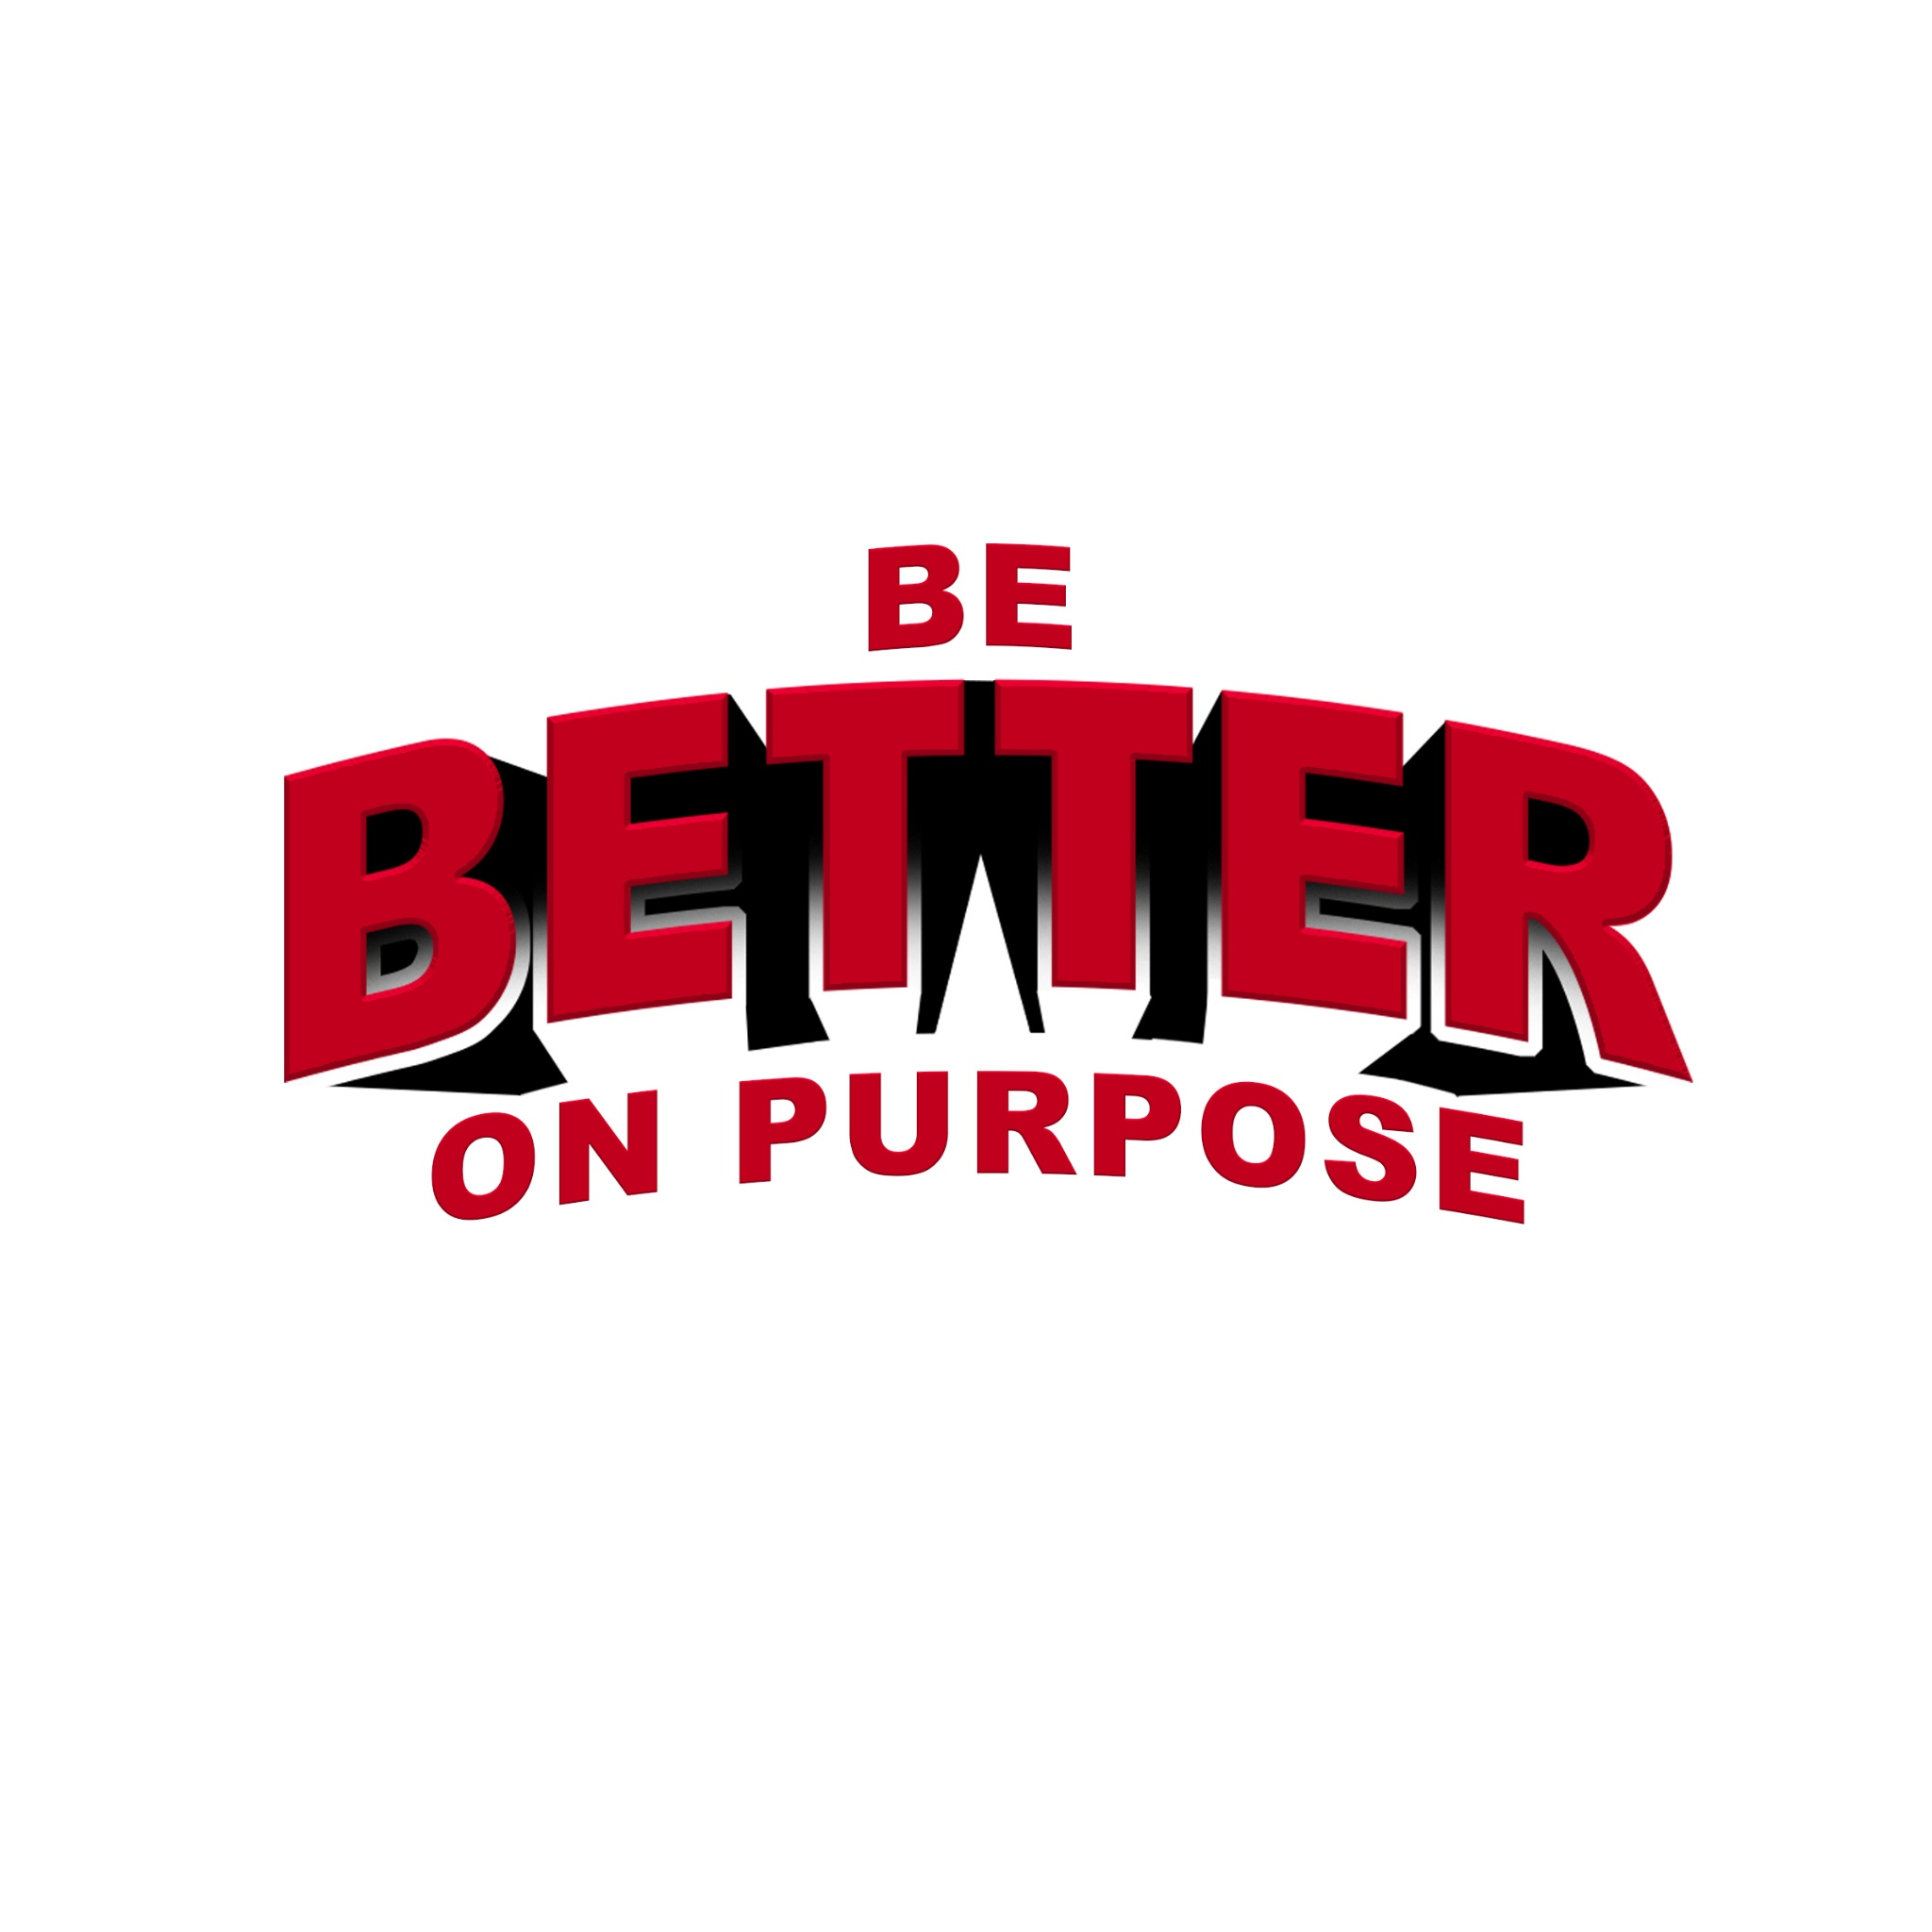 Be Better On Purpose